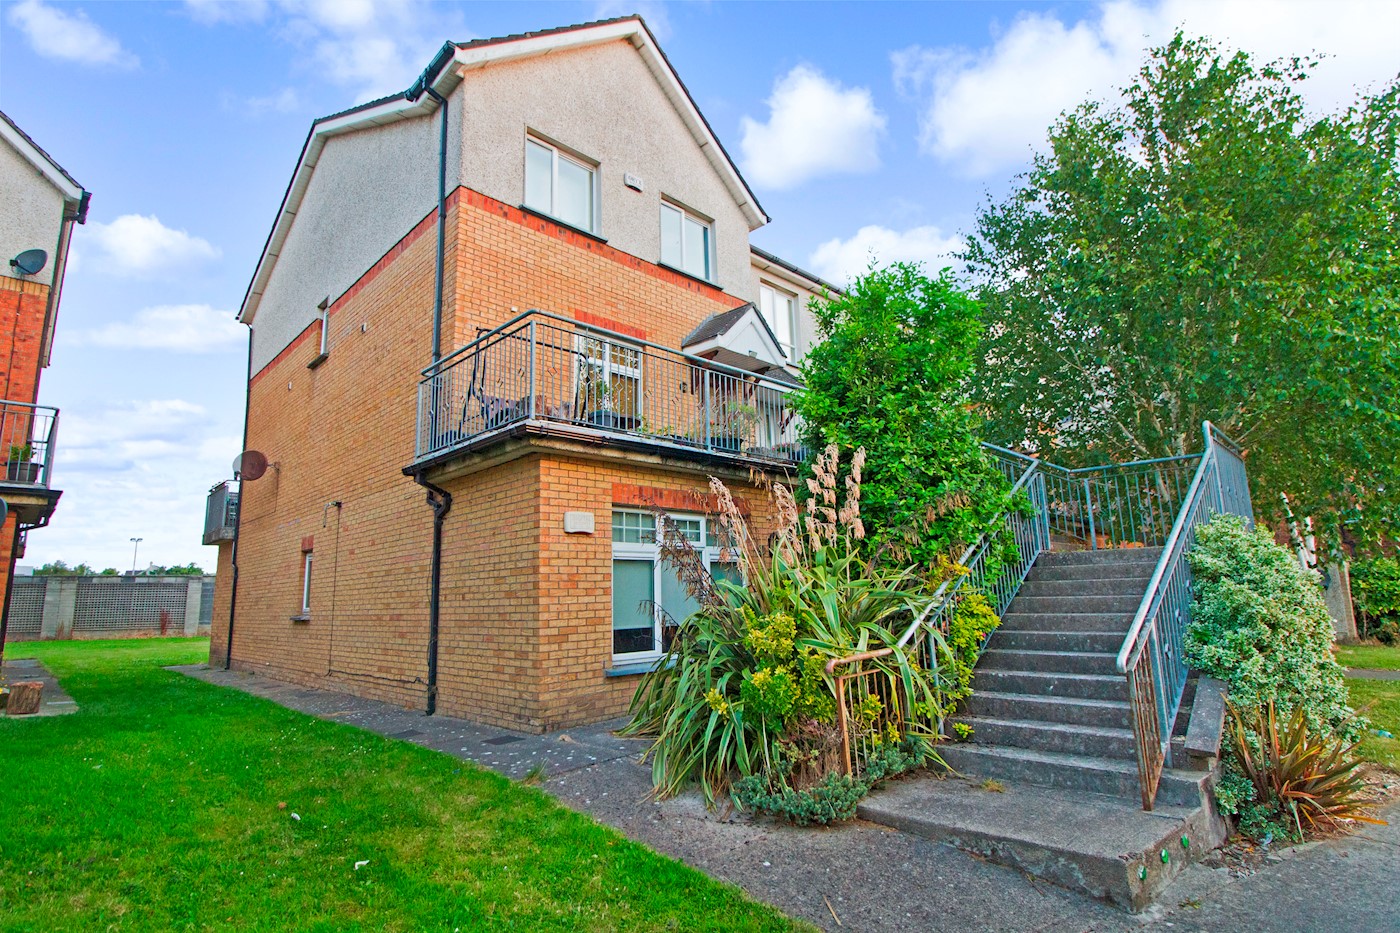 Apartment 21, The Crescent, Milltree Park, Ratoath, Co. Meath, A85 RX62 1/17